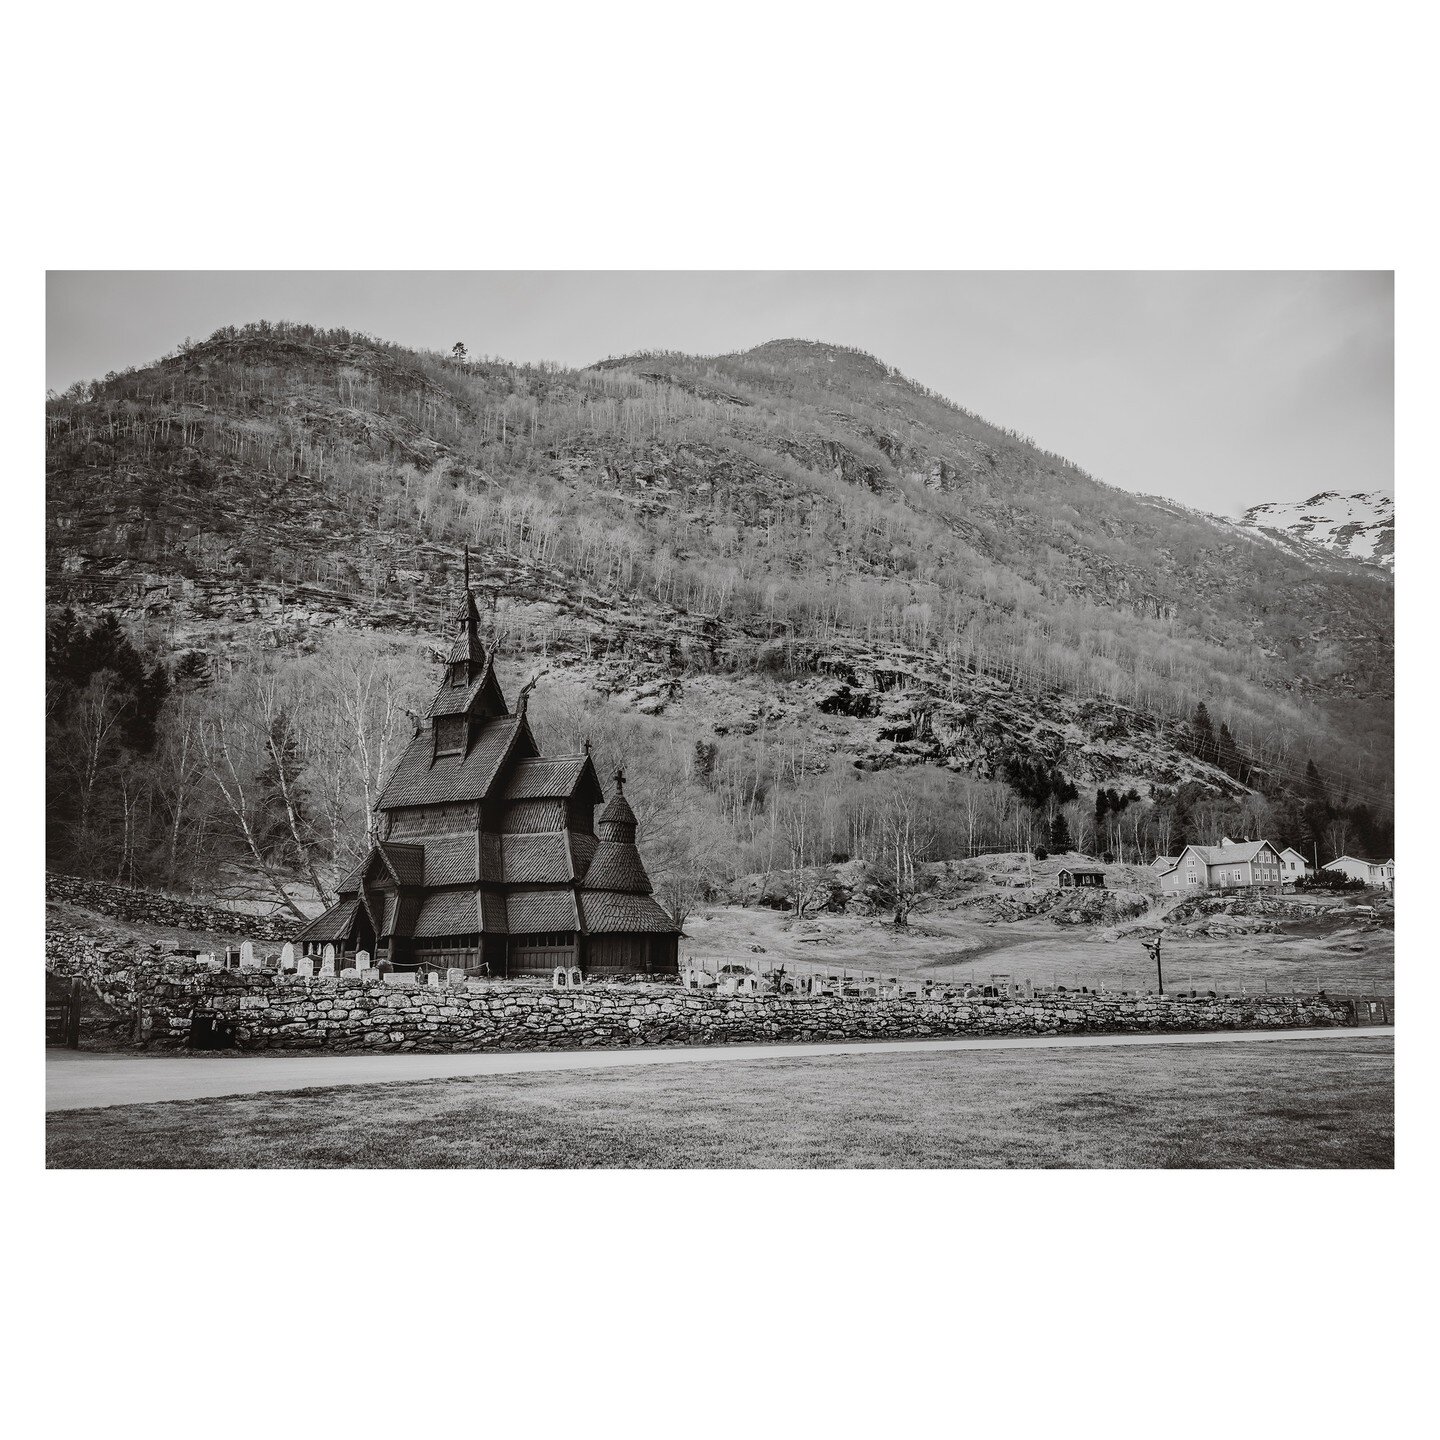 Borgund Stave Church. Built around 1180 and dedicated to the Apostle Andrew. It&rsquo;s the most distinctive stave church and a unique example of impressive medieval architecture in Norway. Very cool.
.
.
.
.
@borgundstavkyrkje @fortidsminneforeninge